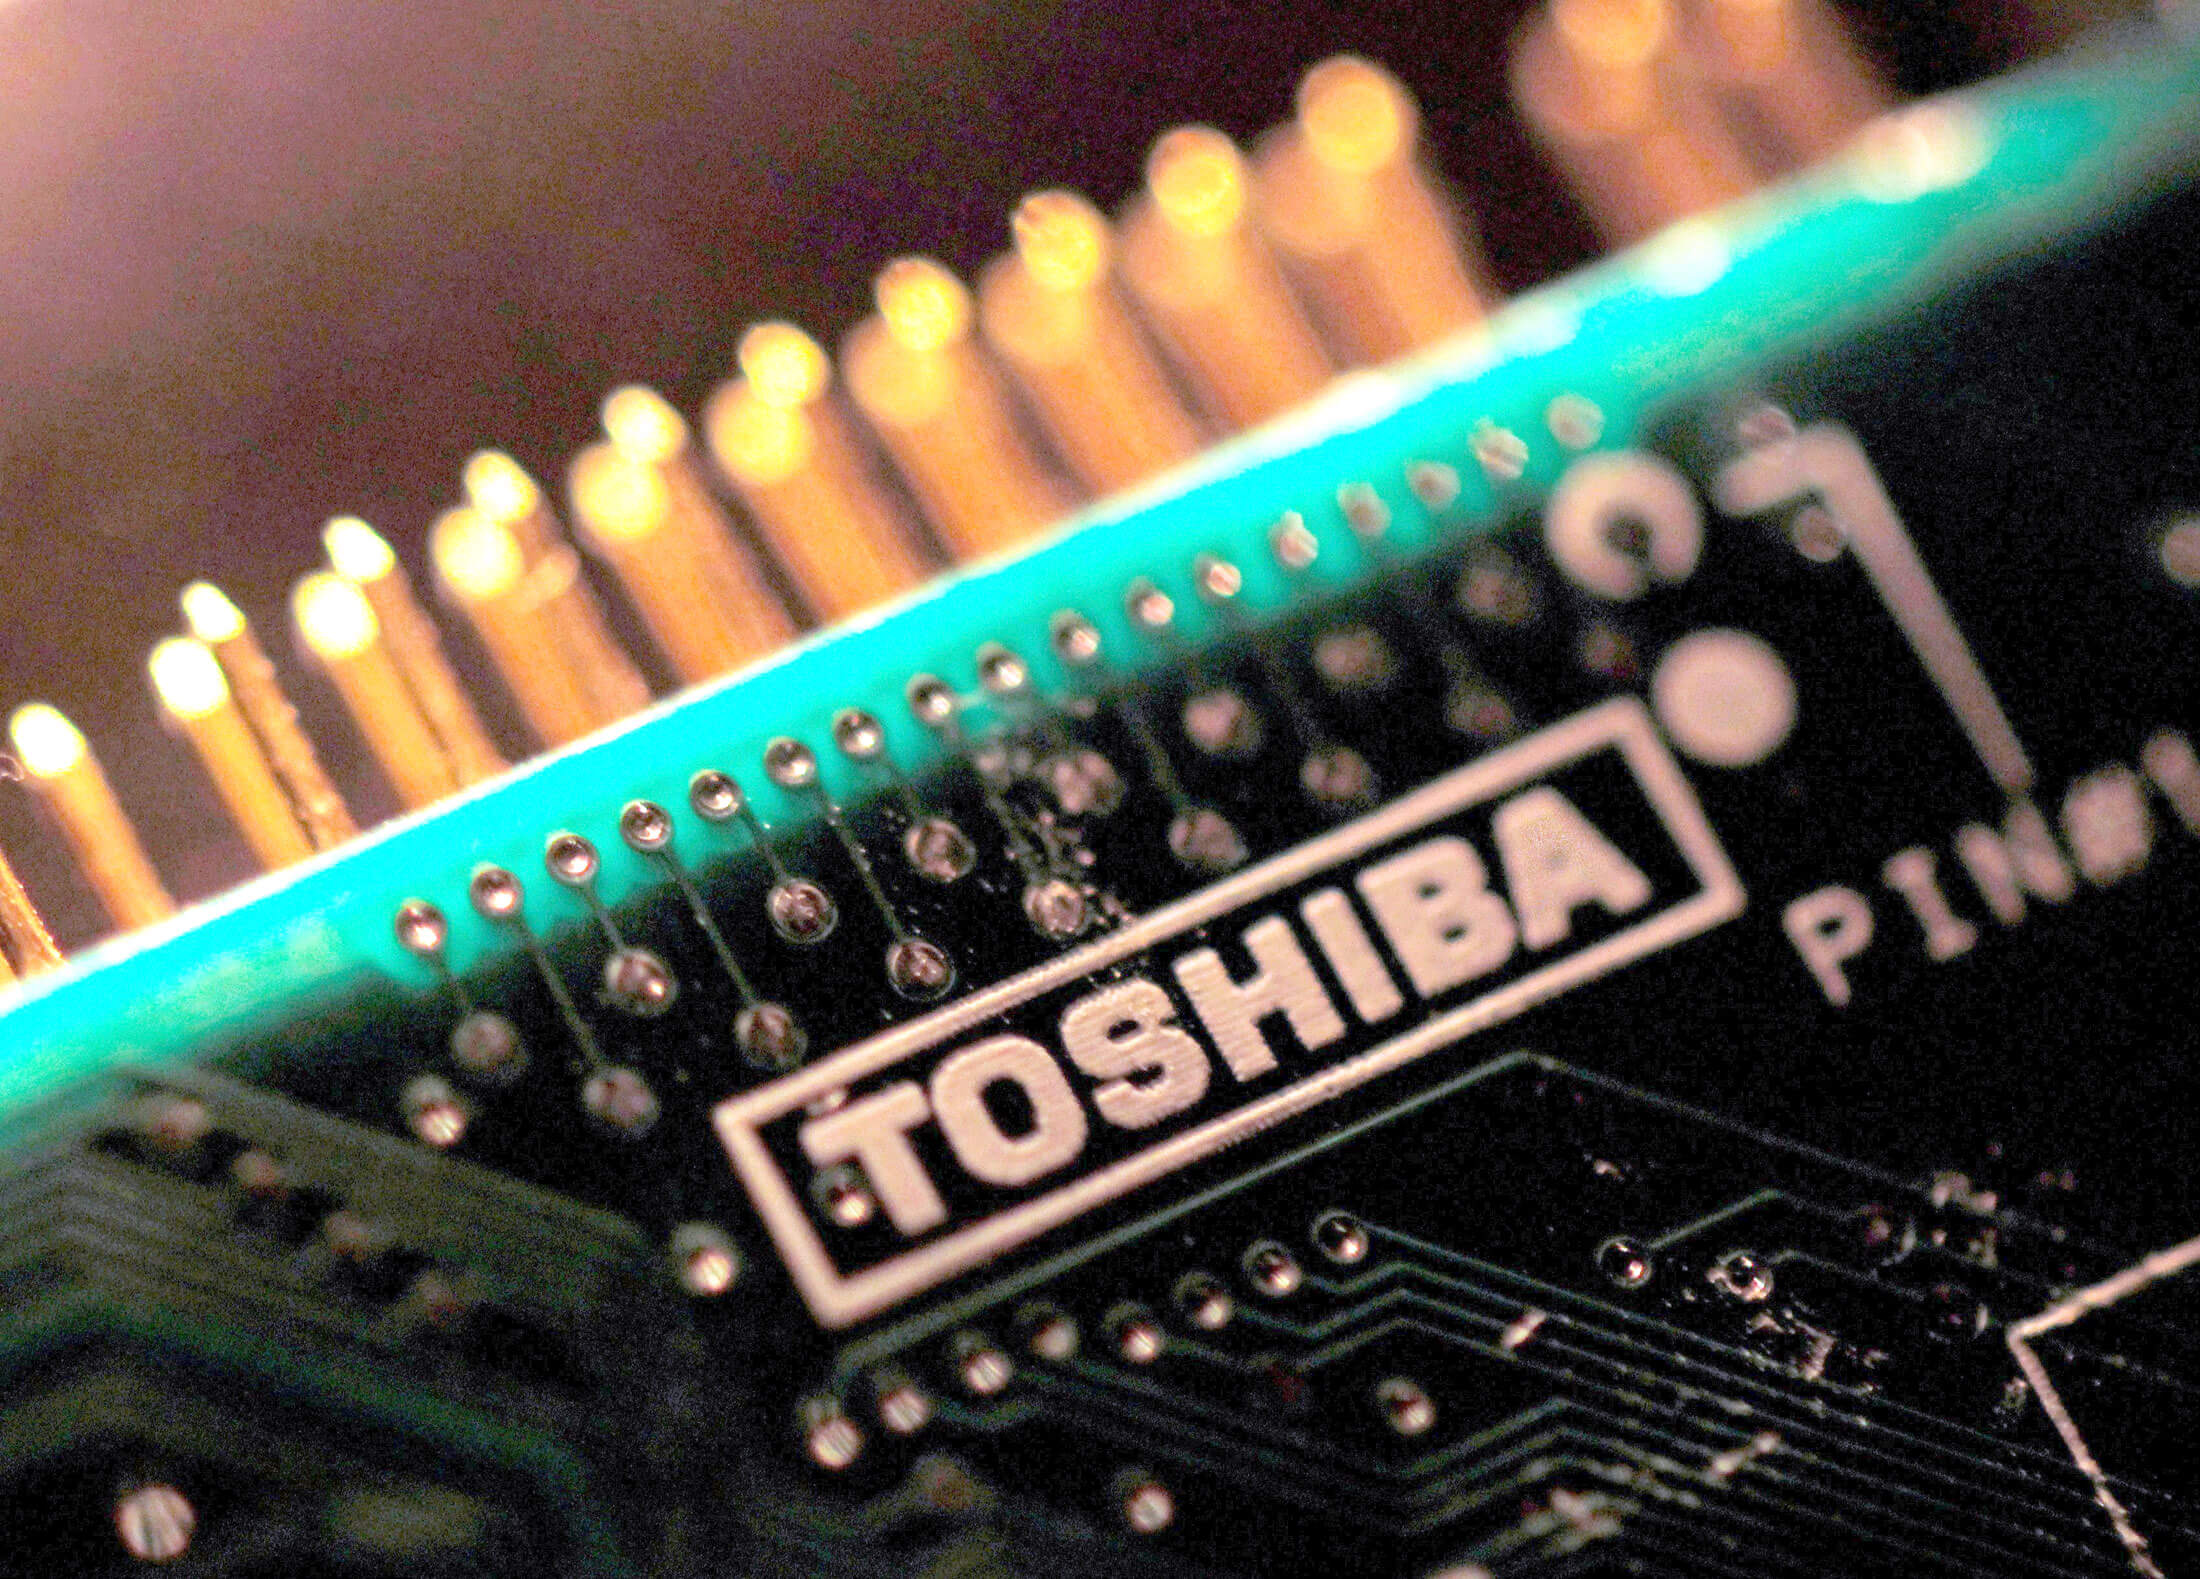 Toshiba's chip division receives approval for $18 billion sale to Bain consortium